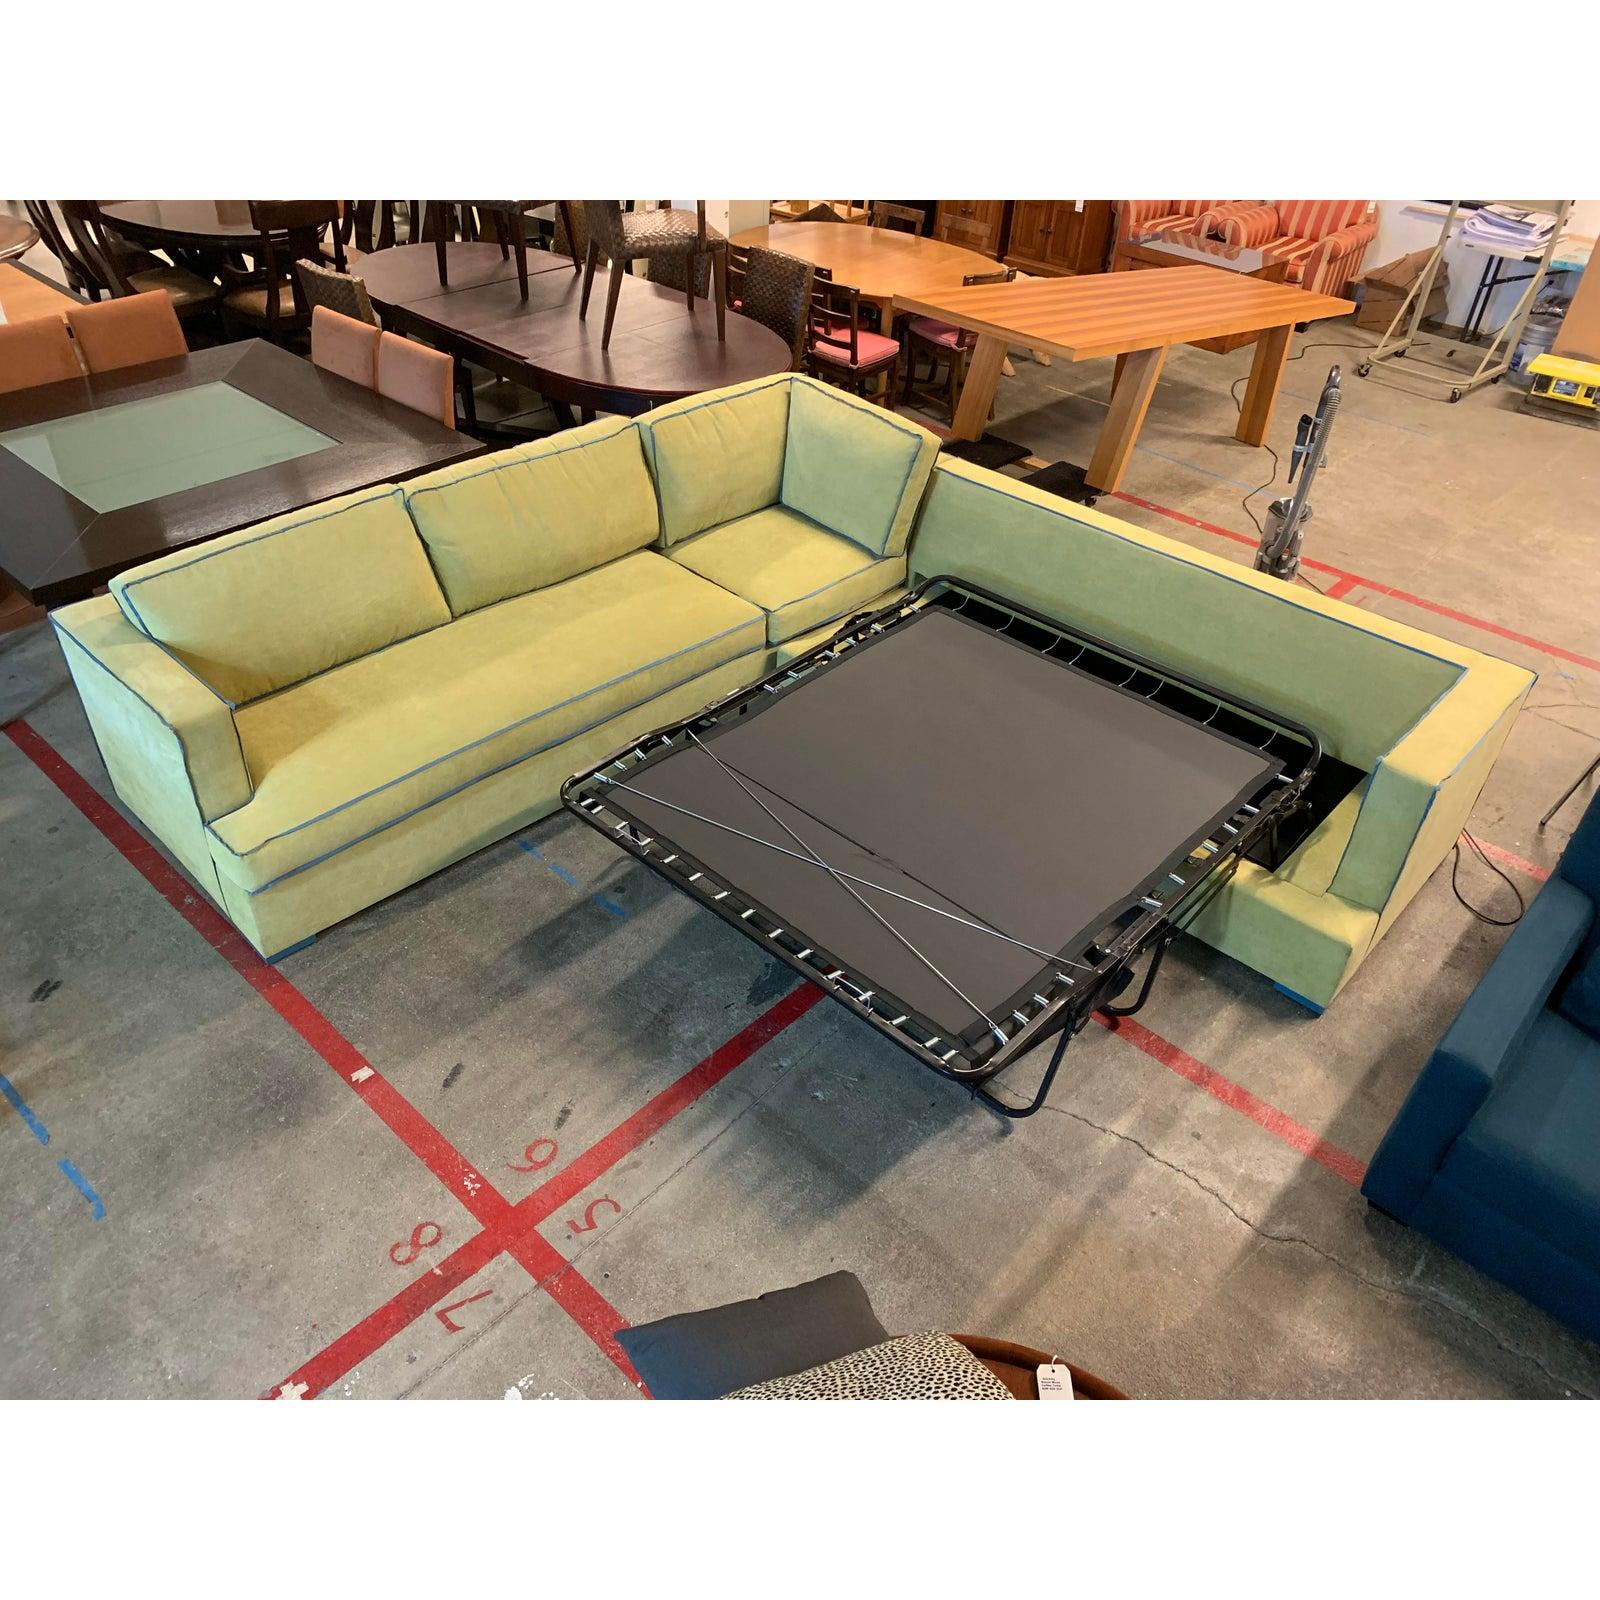 A custom two-piece sectional. Upholstered in a chartreuse fabric with a blue trimming.


Extra dimensions:
Large piece 120 inches x 40 inches x 36 inches
Section with sleeper 86” x 40” x 36” H
Arm height 29”
Seat height 19”
Sleeper 60” x 72”.